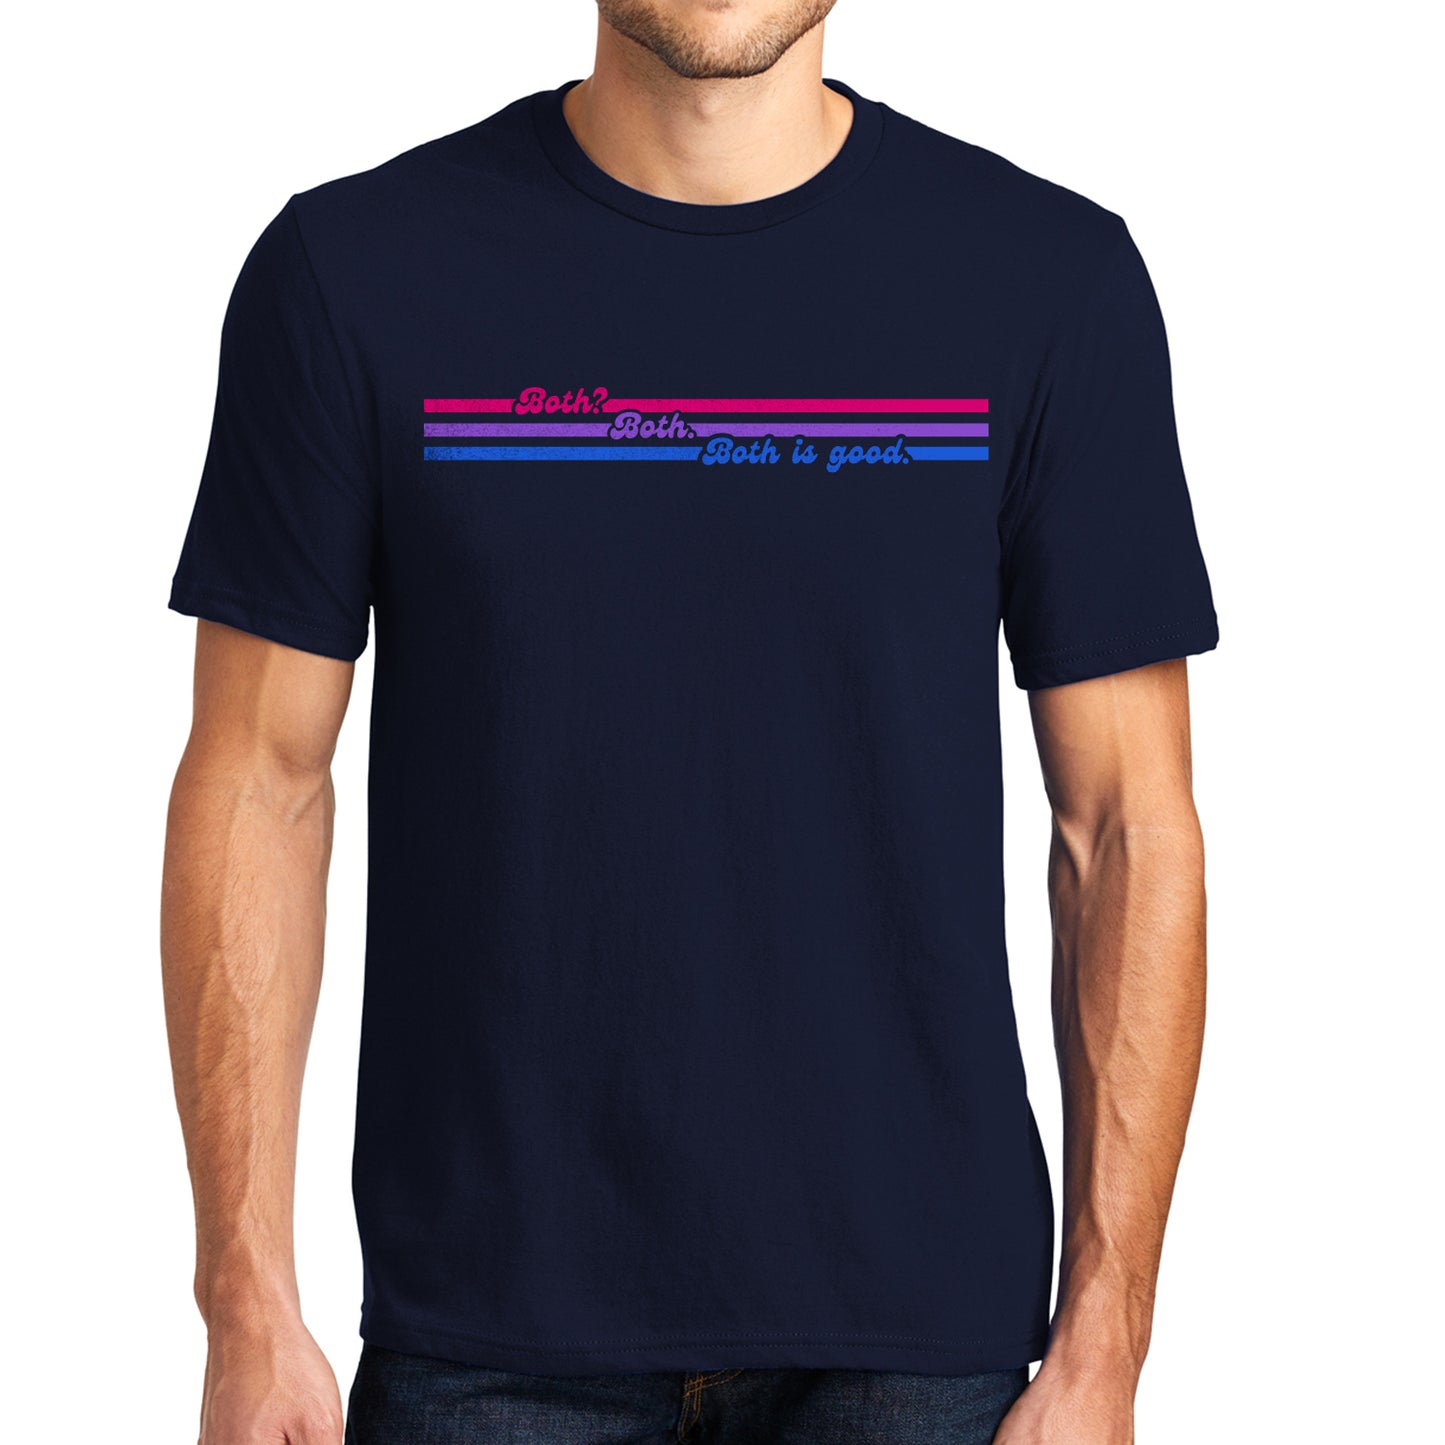 A male model wearing a black T-shirt. The shirt has three parallel lines. The top line is red with the word "Both?" on the left side. The middle line is purple with the word "Both." at the center. The bottom line is blue with the words "Both is good" on the right.